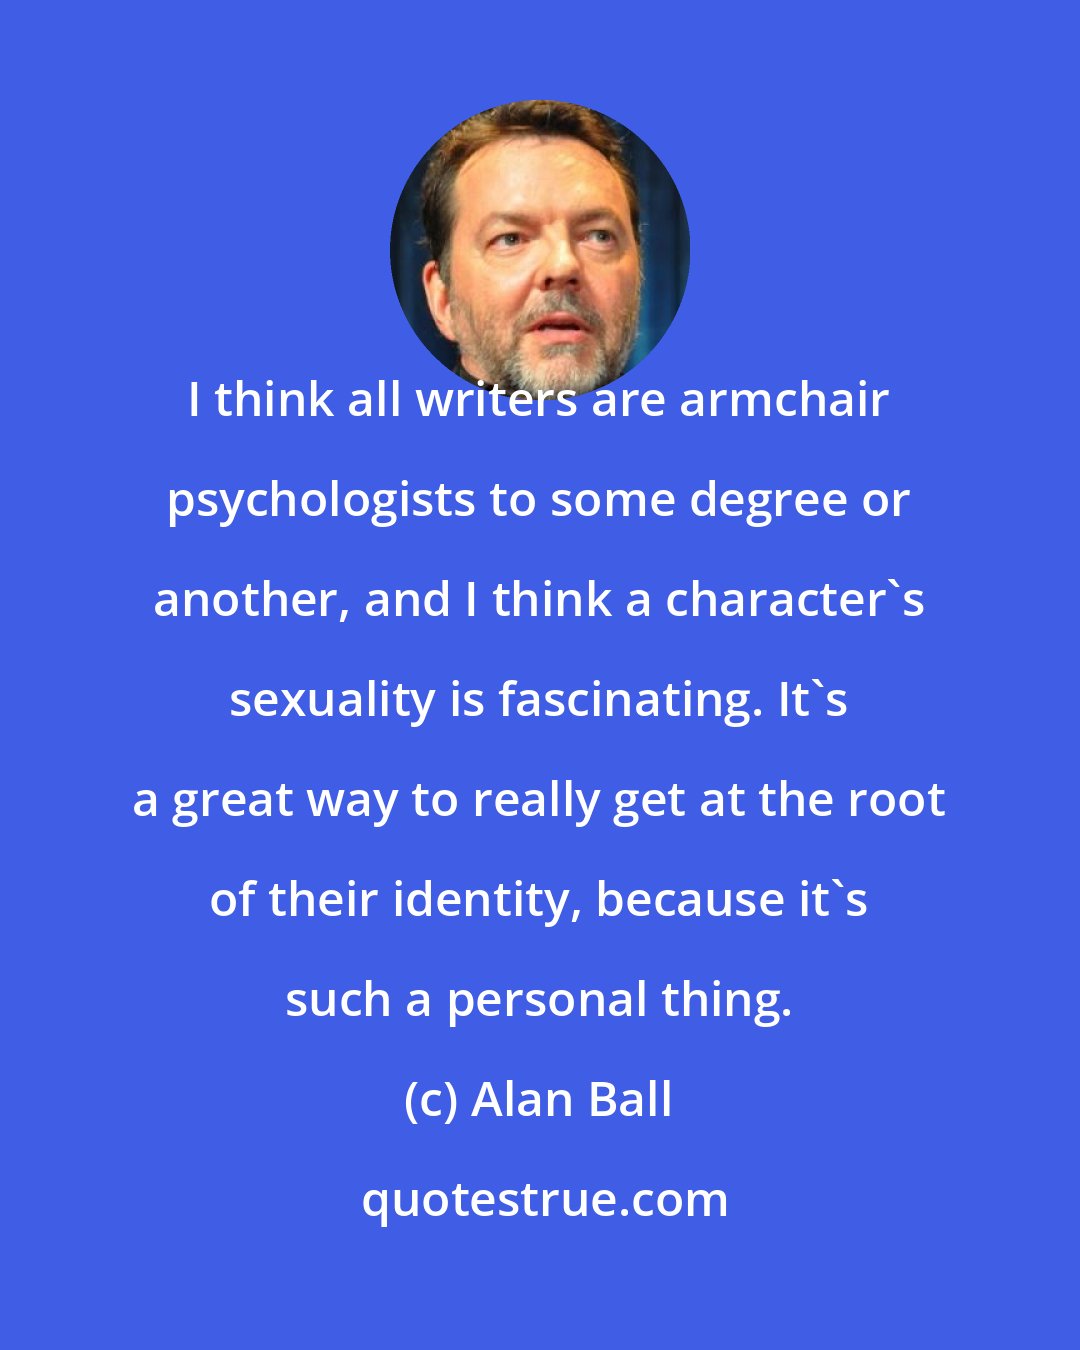 Alan Ball: I think all writers are armchair psychologists to some degree or another, and I think a character's sexuality is fascinating. It's a great way to really get at the root of their identity, because it's such a personal thing.